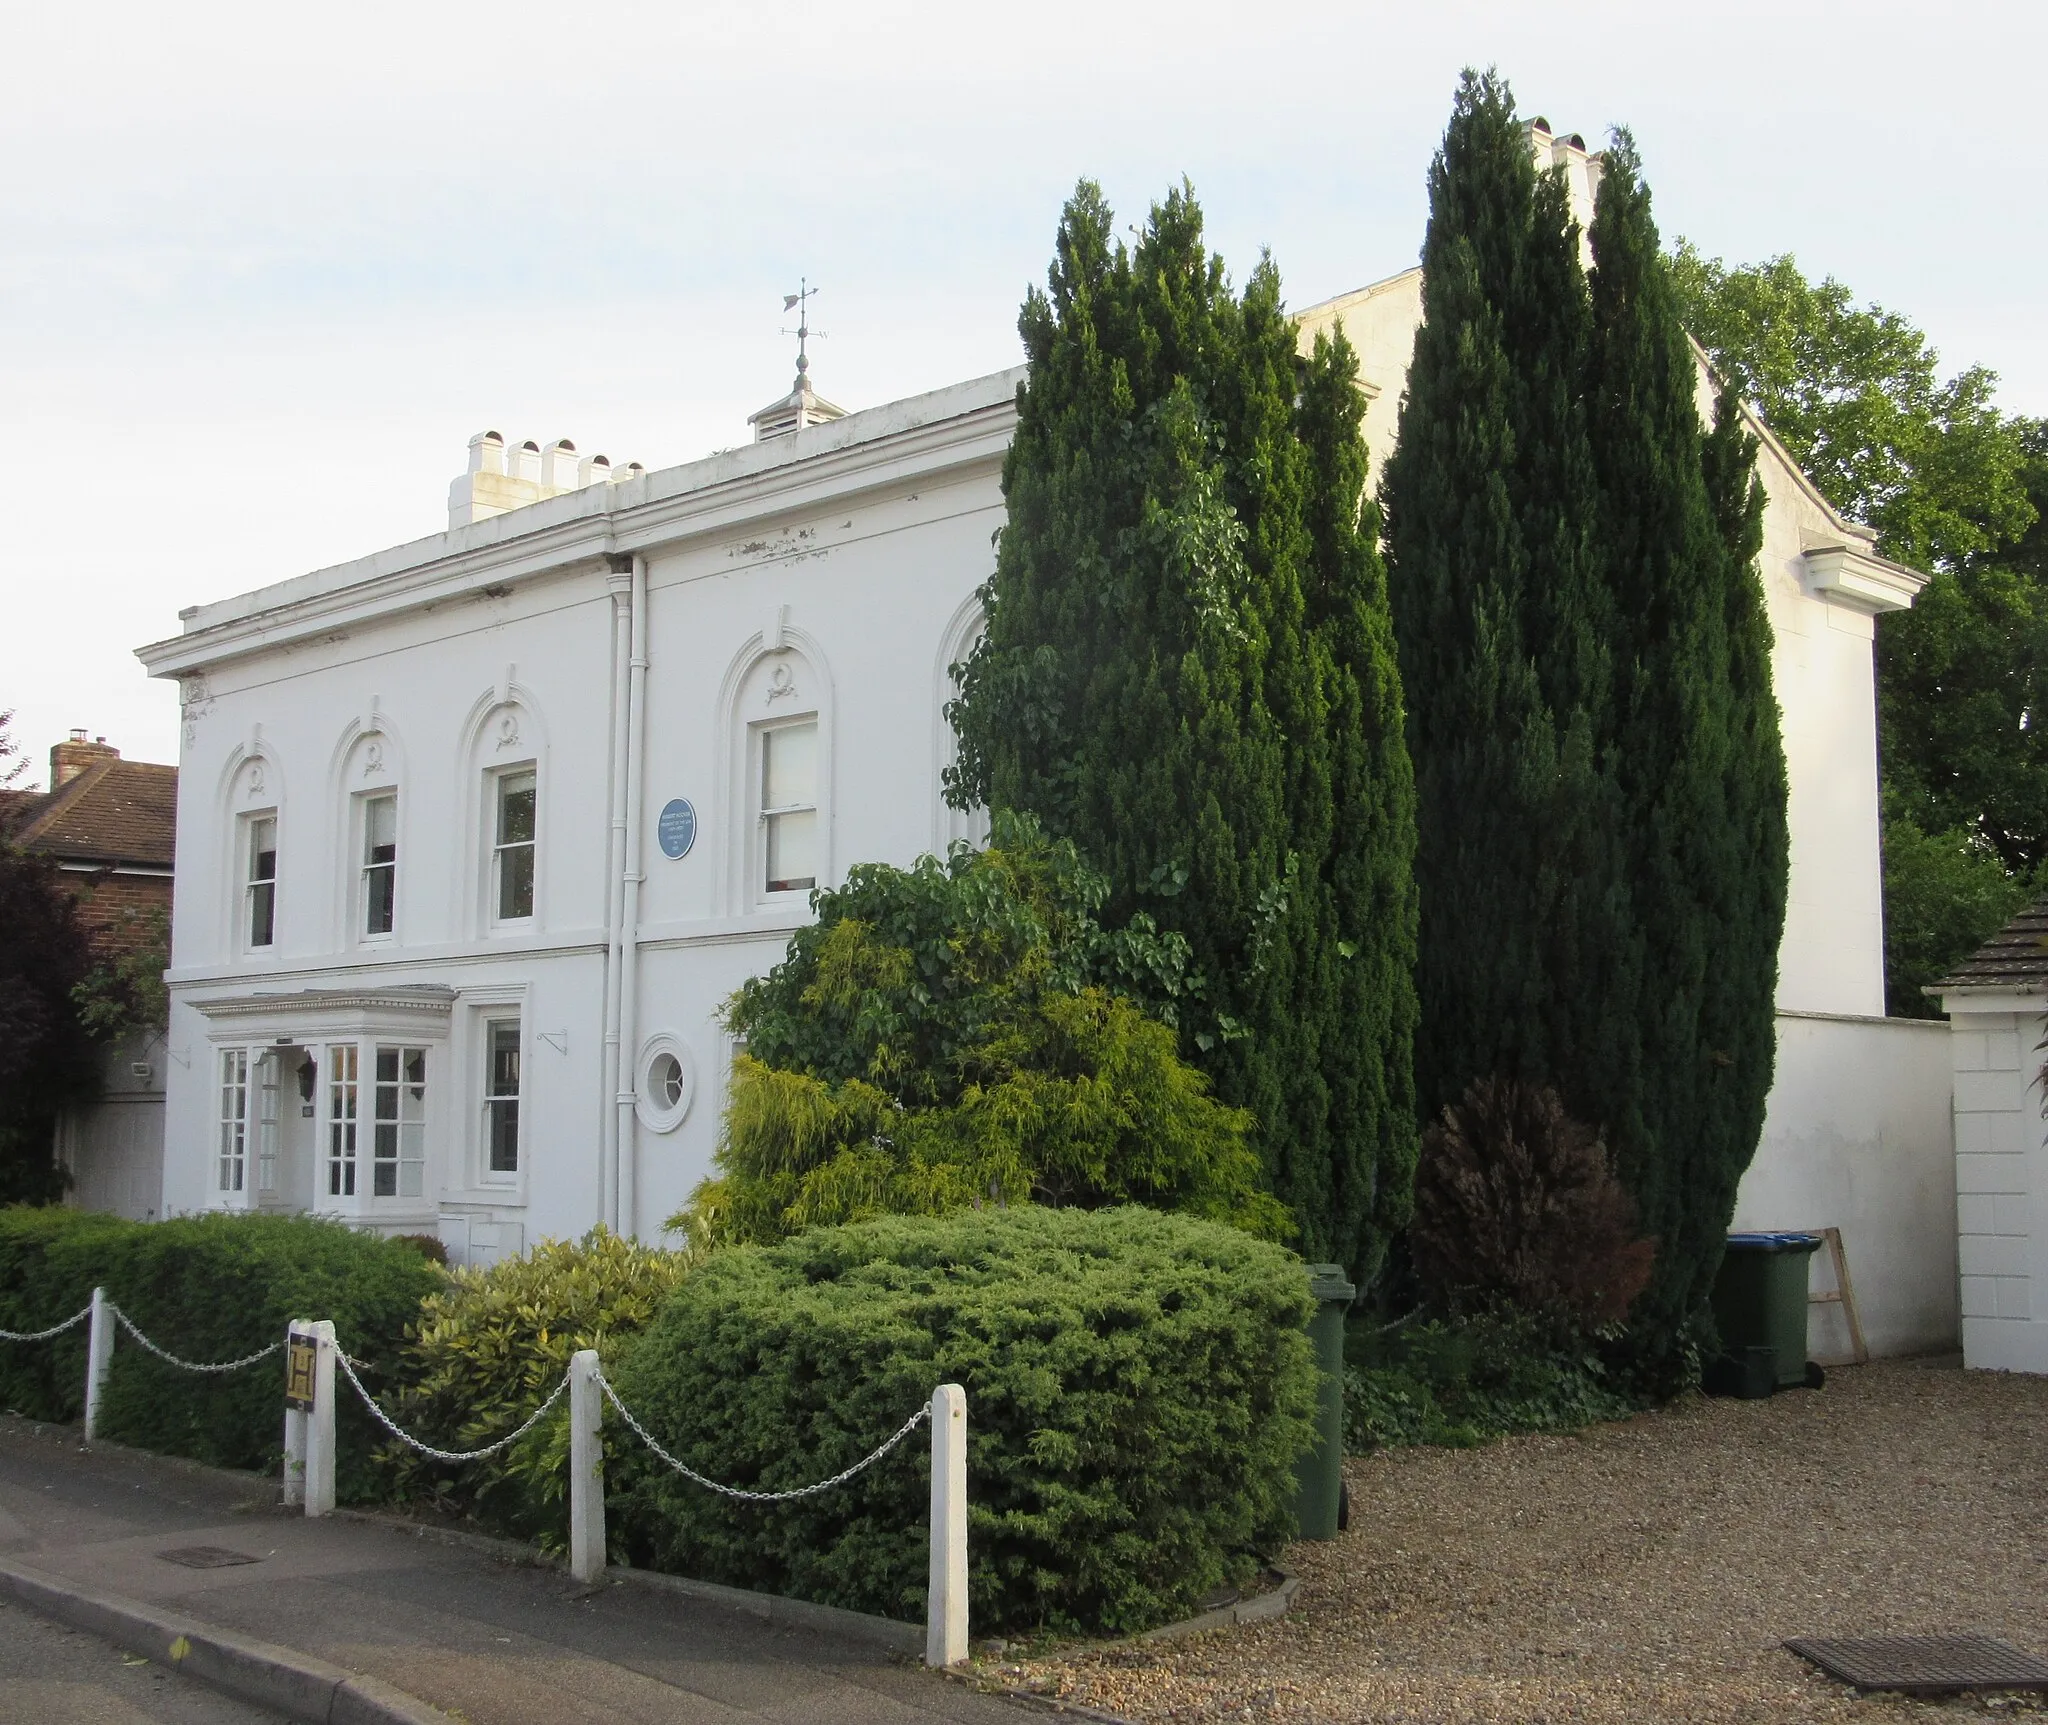 Photo showing: 15 West Grove, Hersham, Borough of Elmbridge, Surrey, England.  Herbert Hoover lived here, as indicated by the blue plaque.